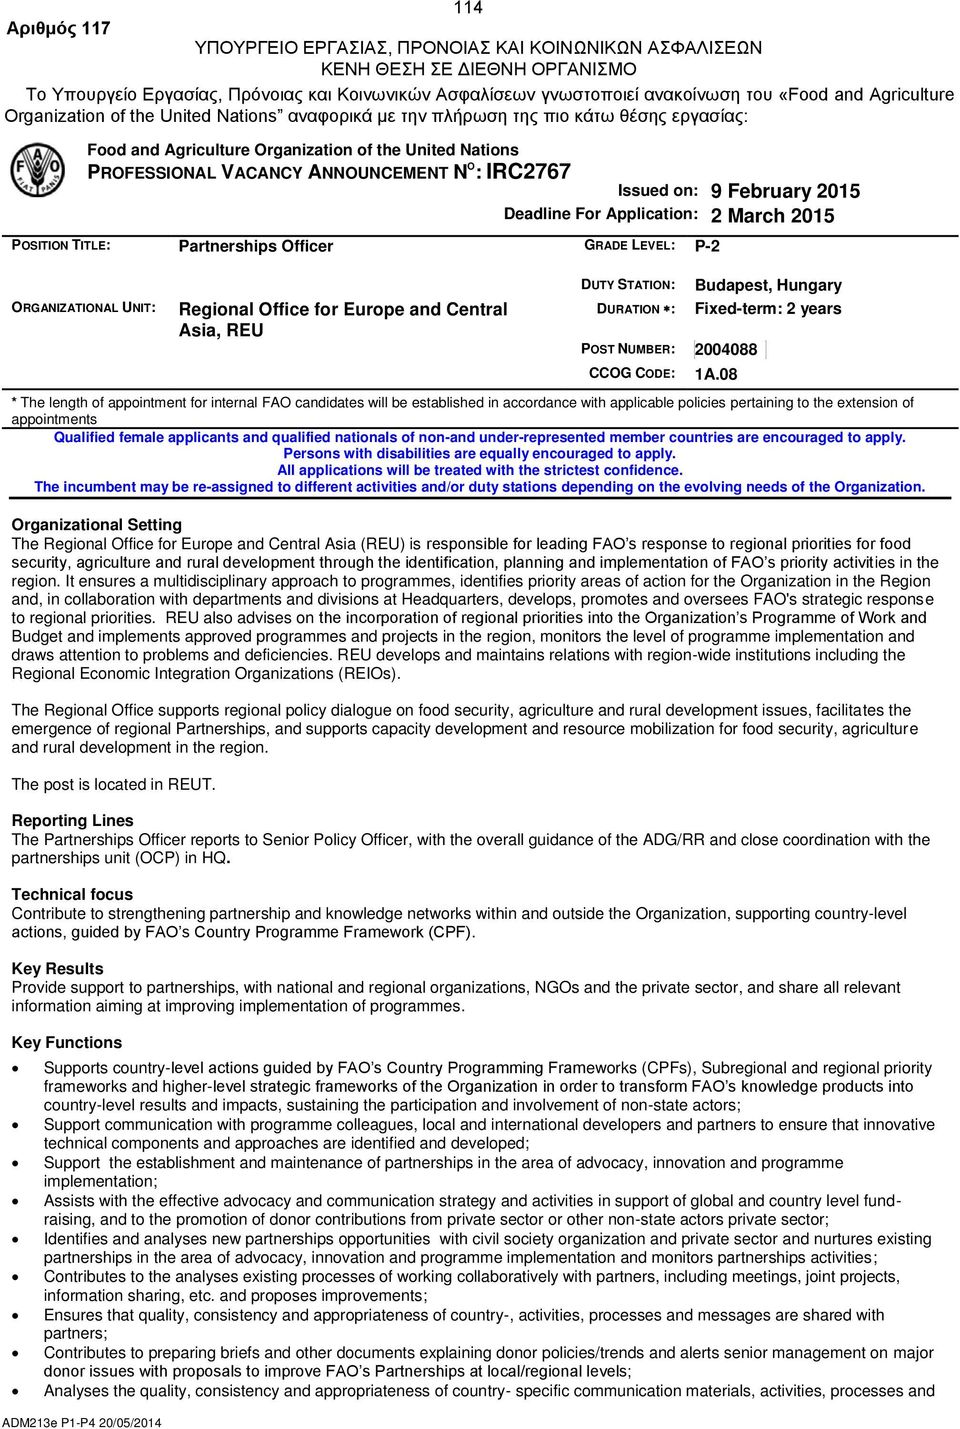 IRC2767 Issued on: 9 February 2015 Deadline For Application: 2 March 2015 POSITION TITLE: Partnerships Officer GRADE LEVEL: P-2 ORGANIZATIONAL UNIT: Regional Office for Europe and Central Asia, REU